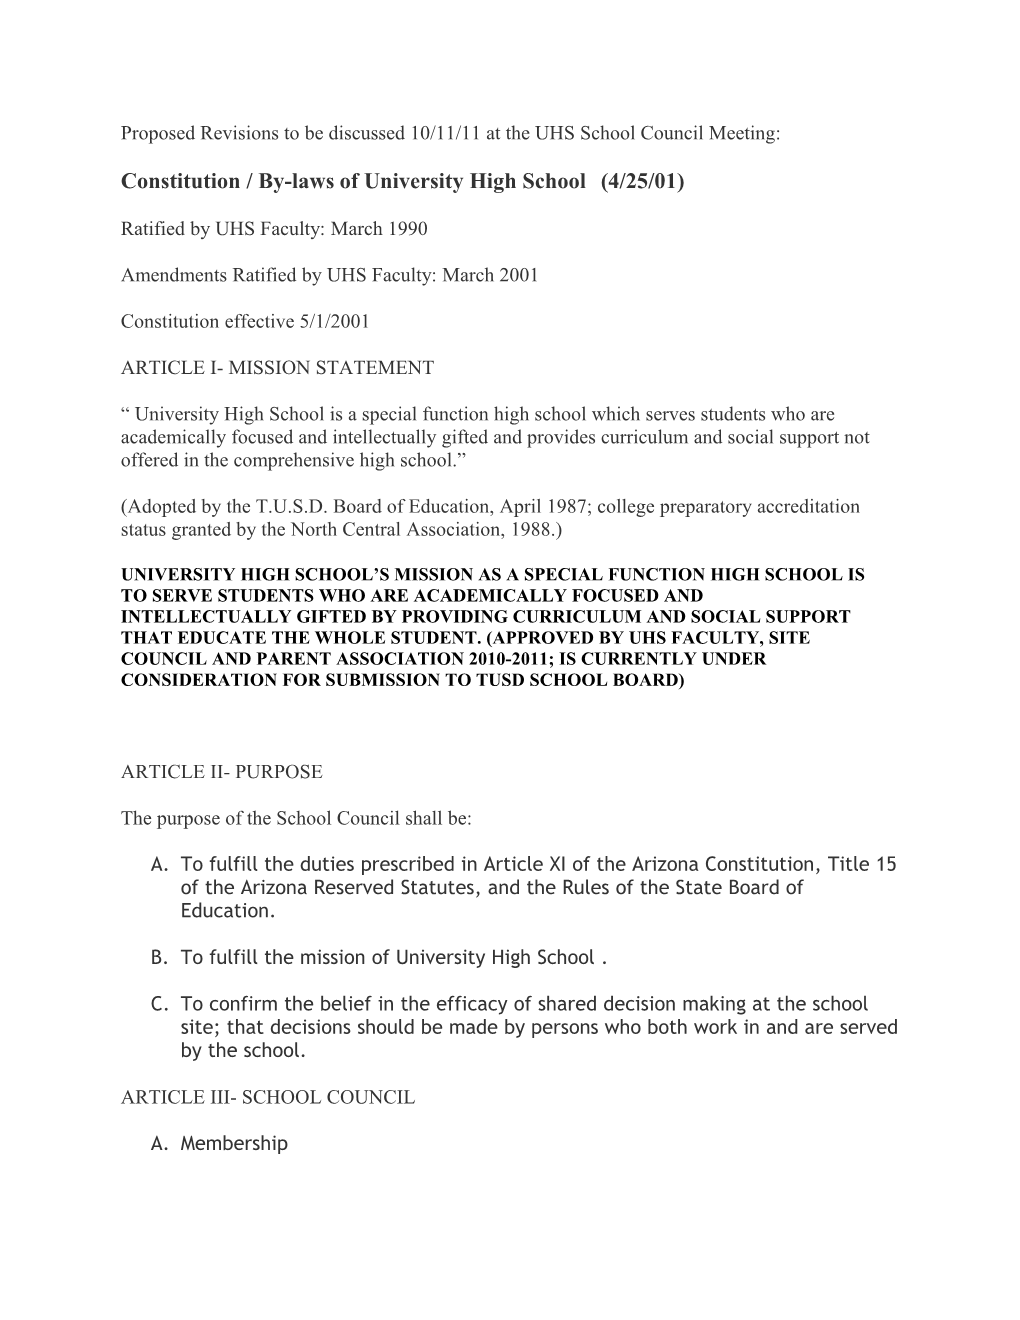 Proposed Revisions to Be Discussed 10/11/11 at the UHS School Council Meeting